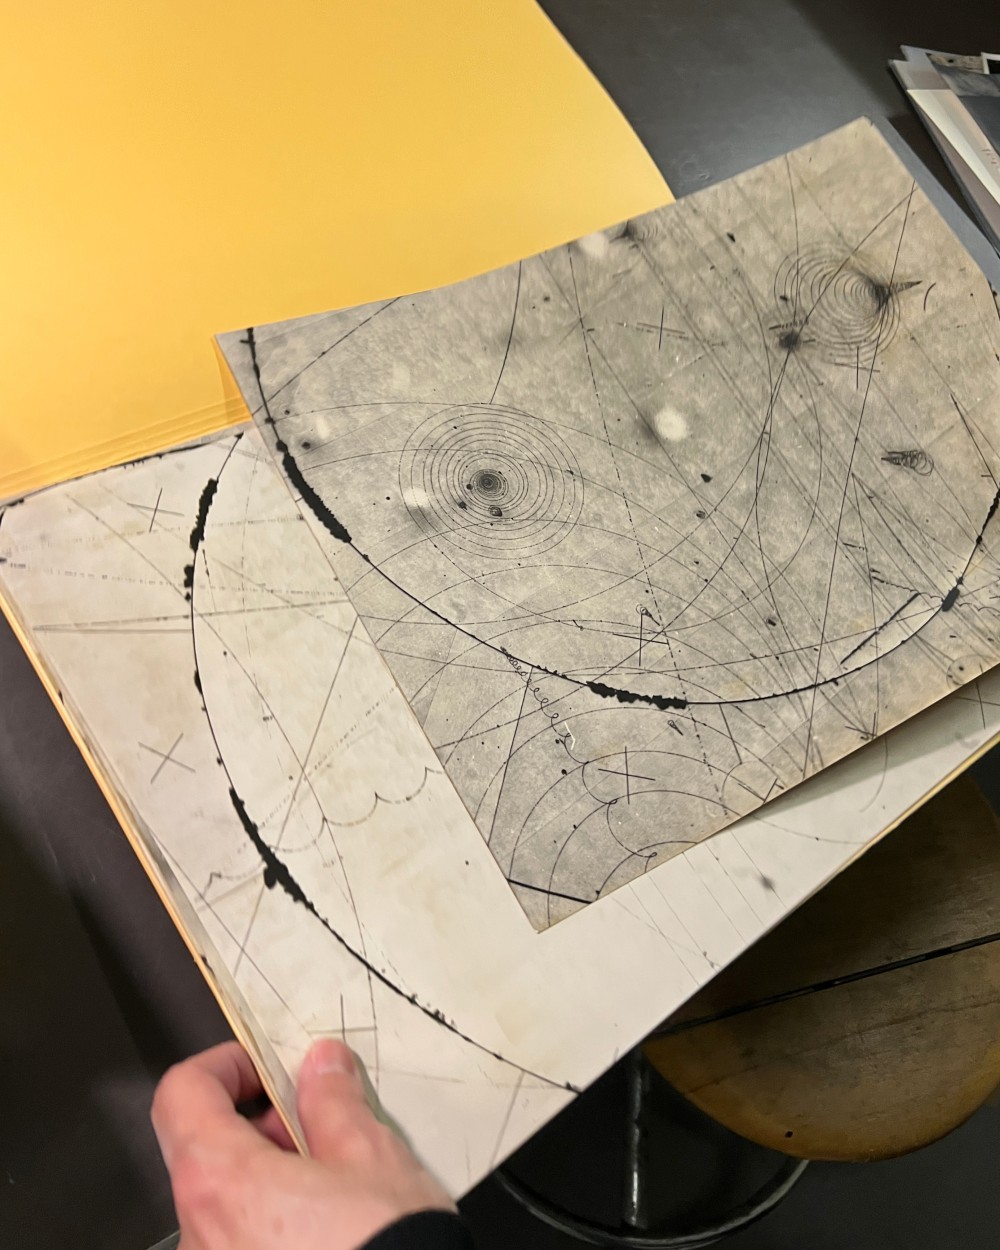 Photograph of particle tracks seen in the cloud chamber in the CERN's archives. Photo by Tania Candiani